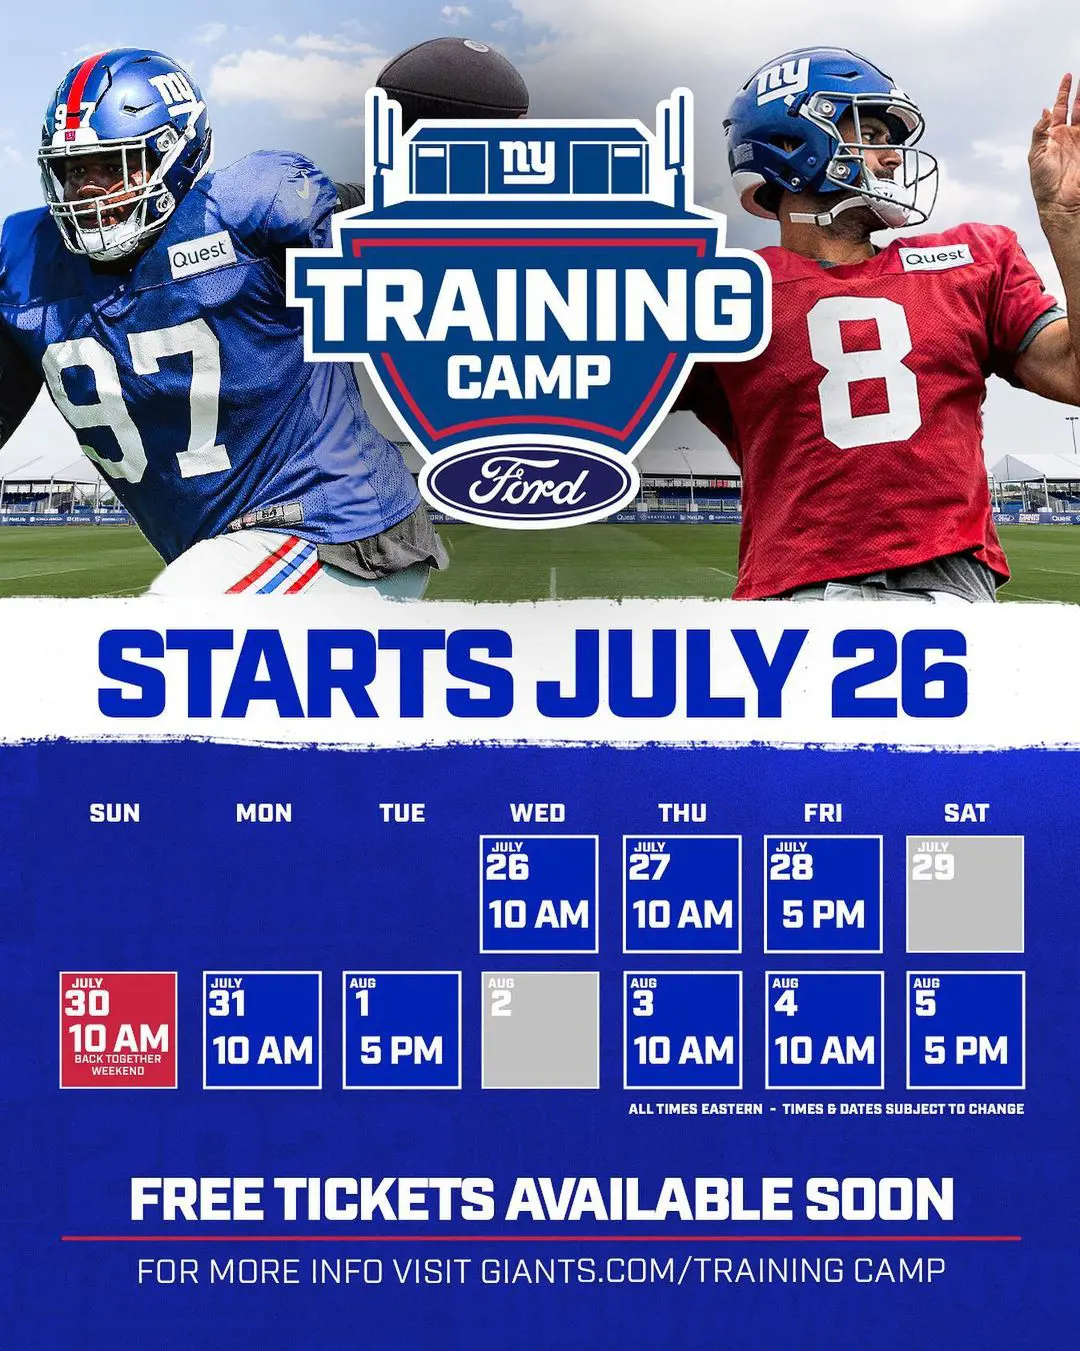 Training Camp schedule of the Giants ahead of the new season.